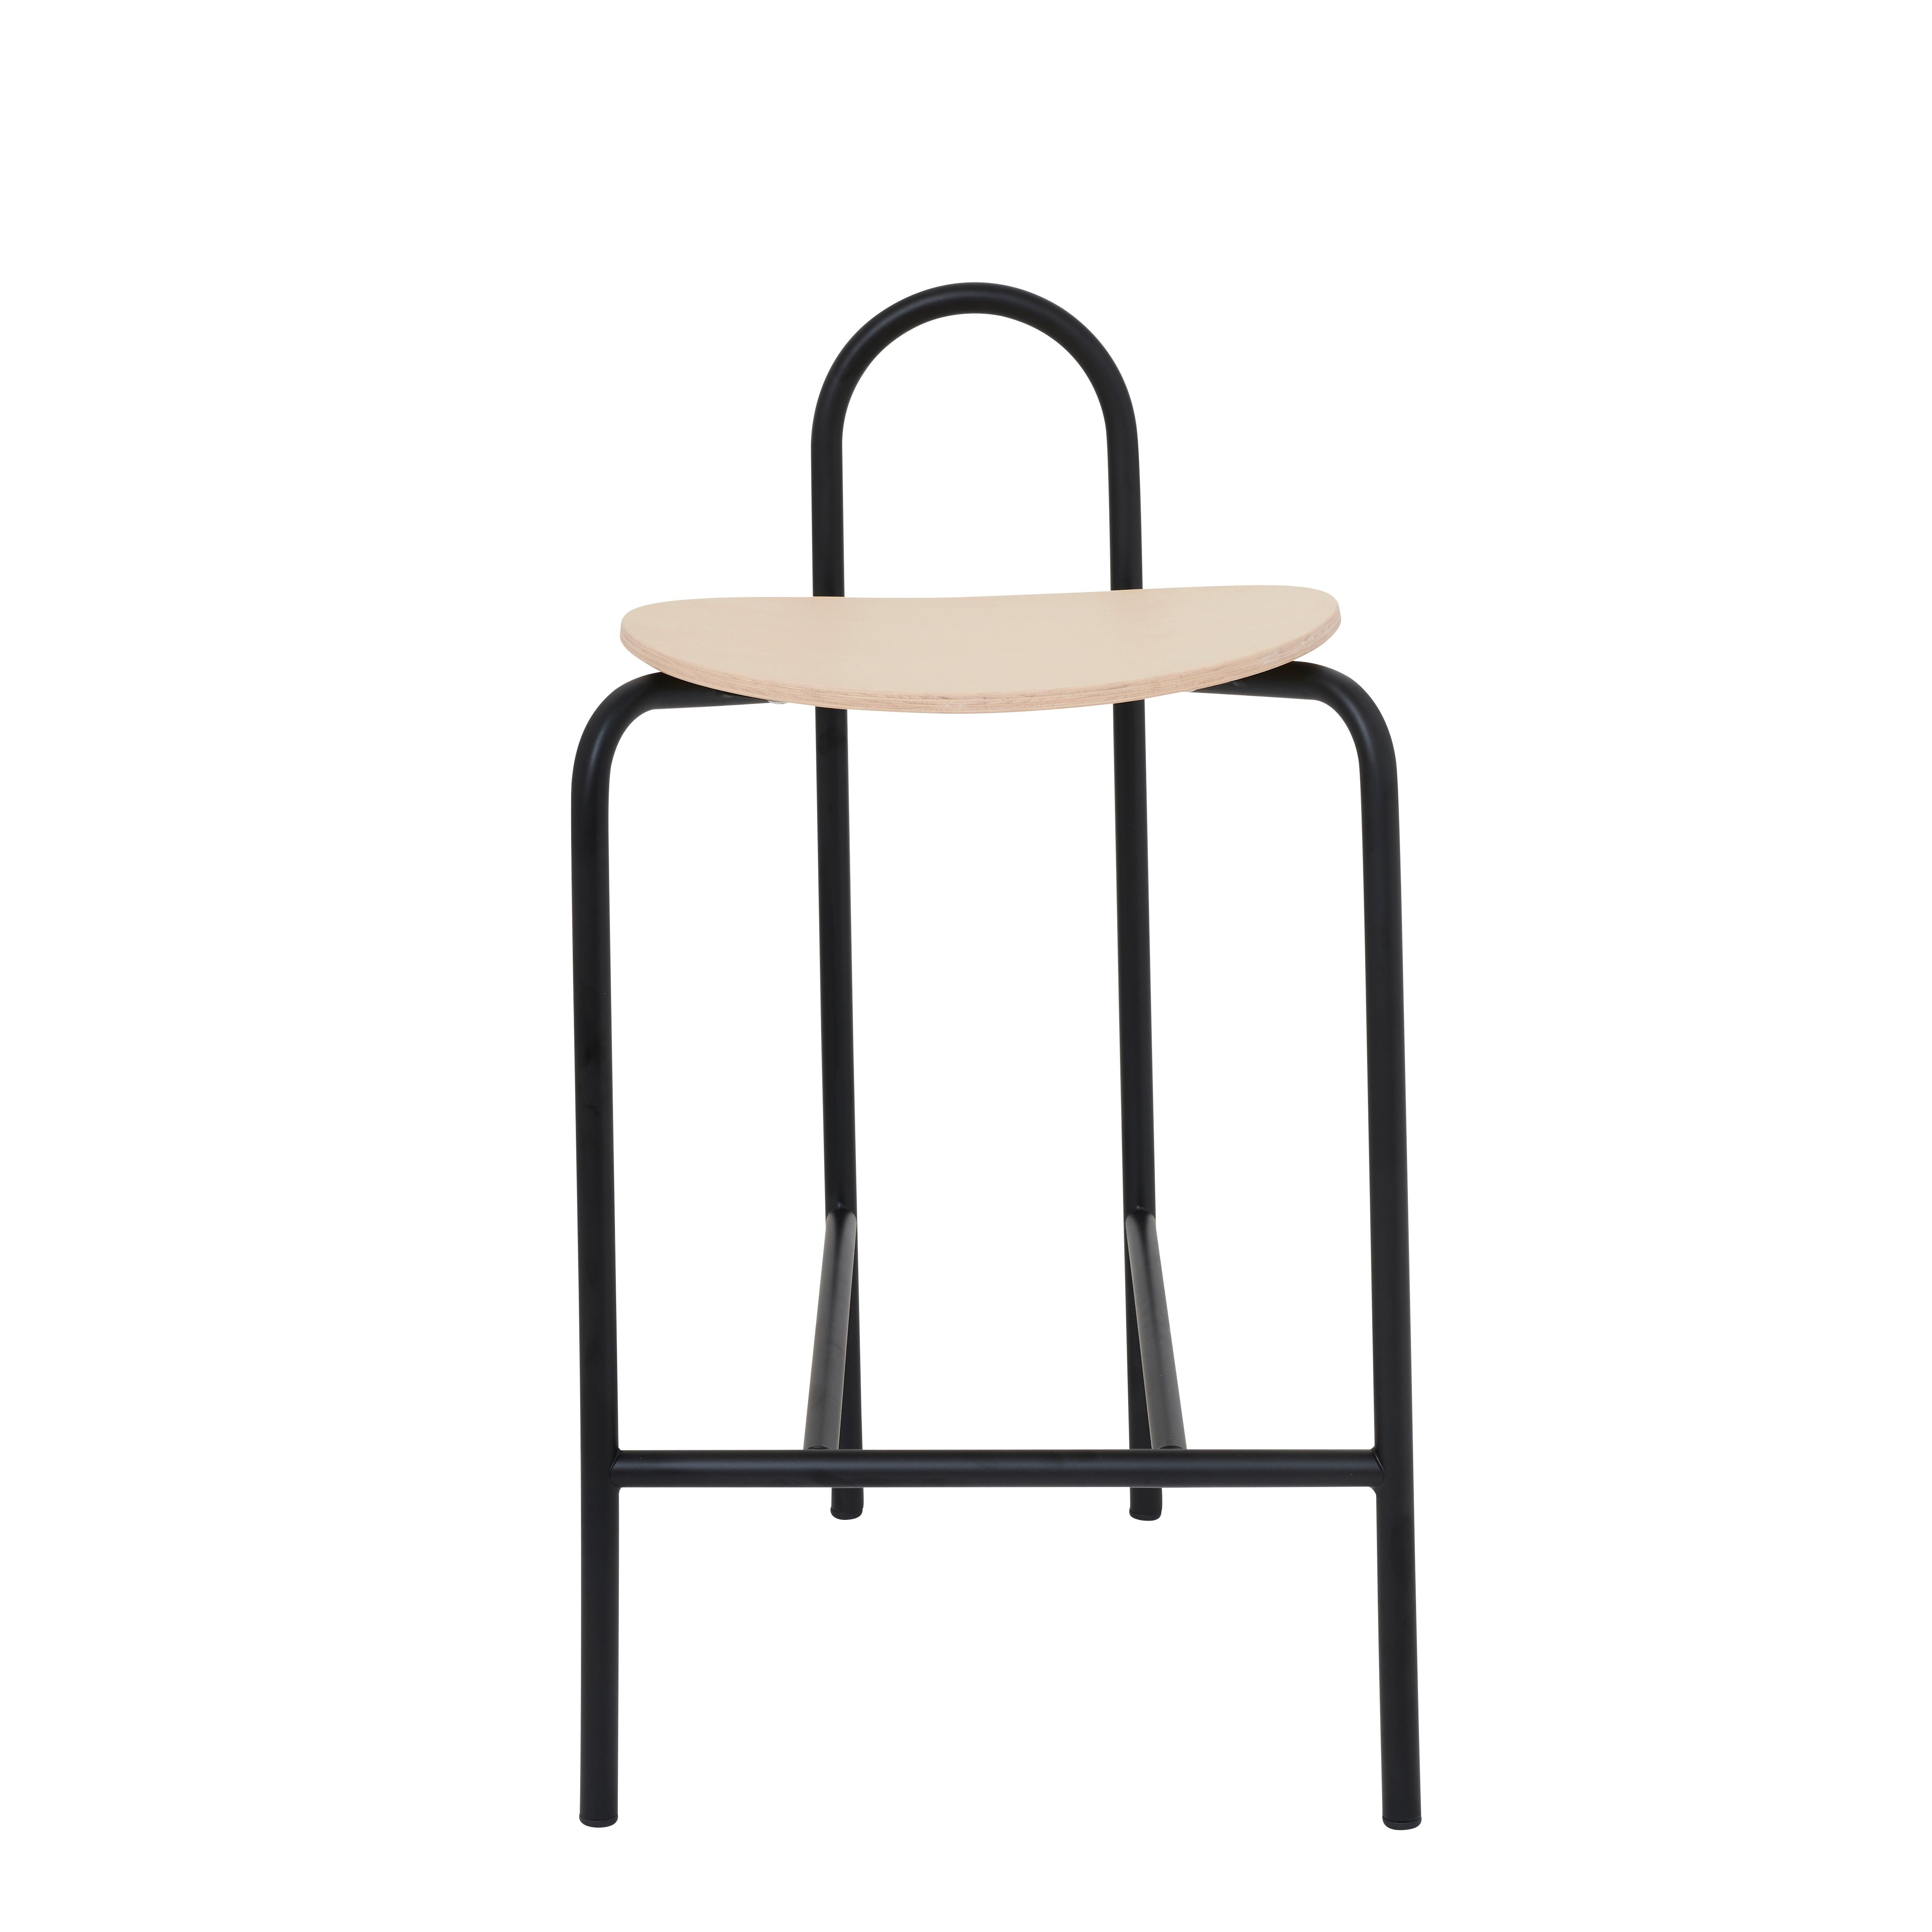 A natural extension to the popular Michelle chair, the Michelle stool continues to play on the visual application of the arc, creating a simple, striking and highly adaptable stool for any interior.

About this finishing:
Seat: Non-upholstered